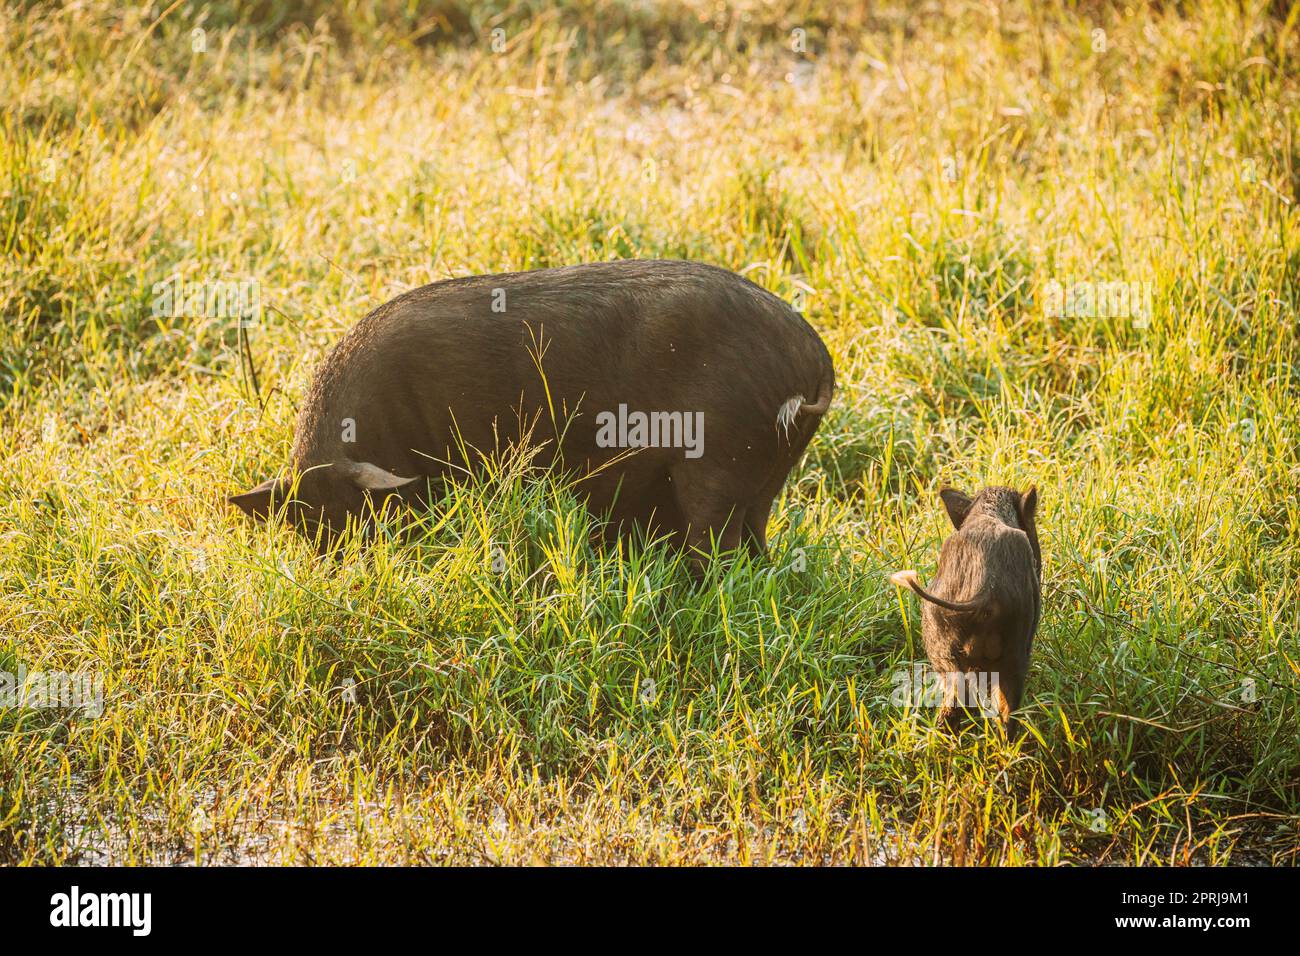 Big And Small Household Black Pigs Looking For Food In Fresh Green Grass In Farm. Pig Farming Is Raising And Breeding Of Domestic Pigs. Stock Photo